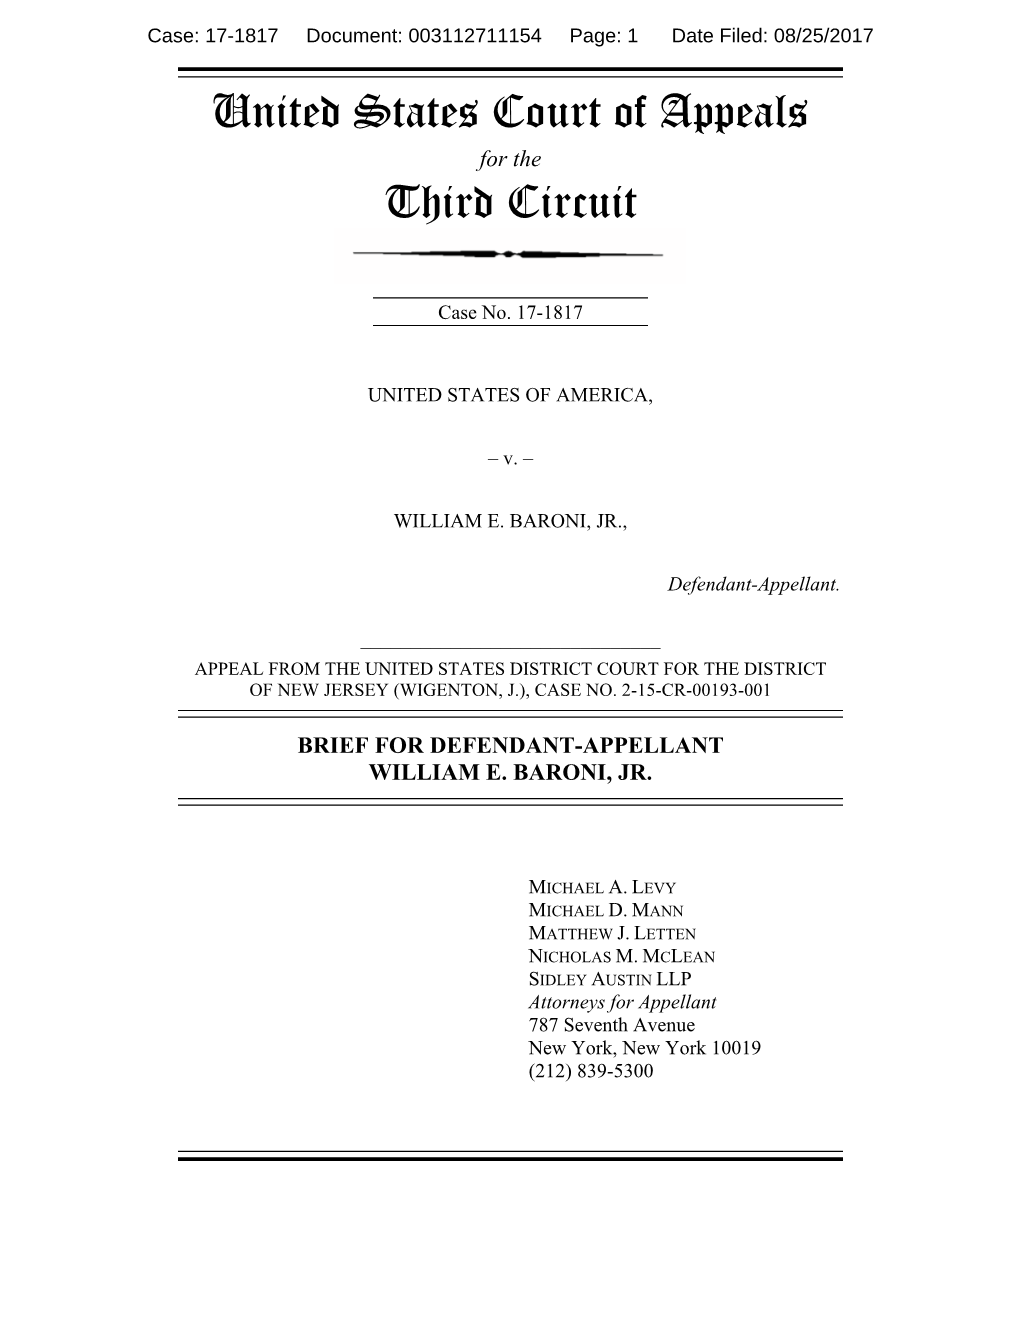 United States Court of Appeals Third Circuit